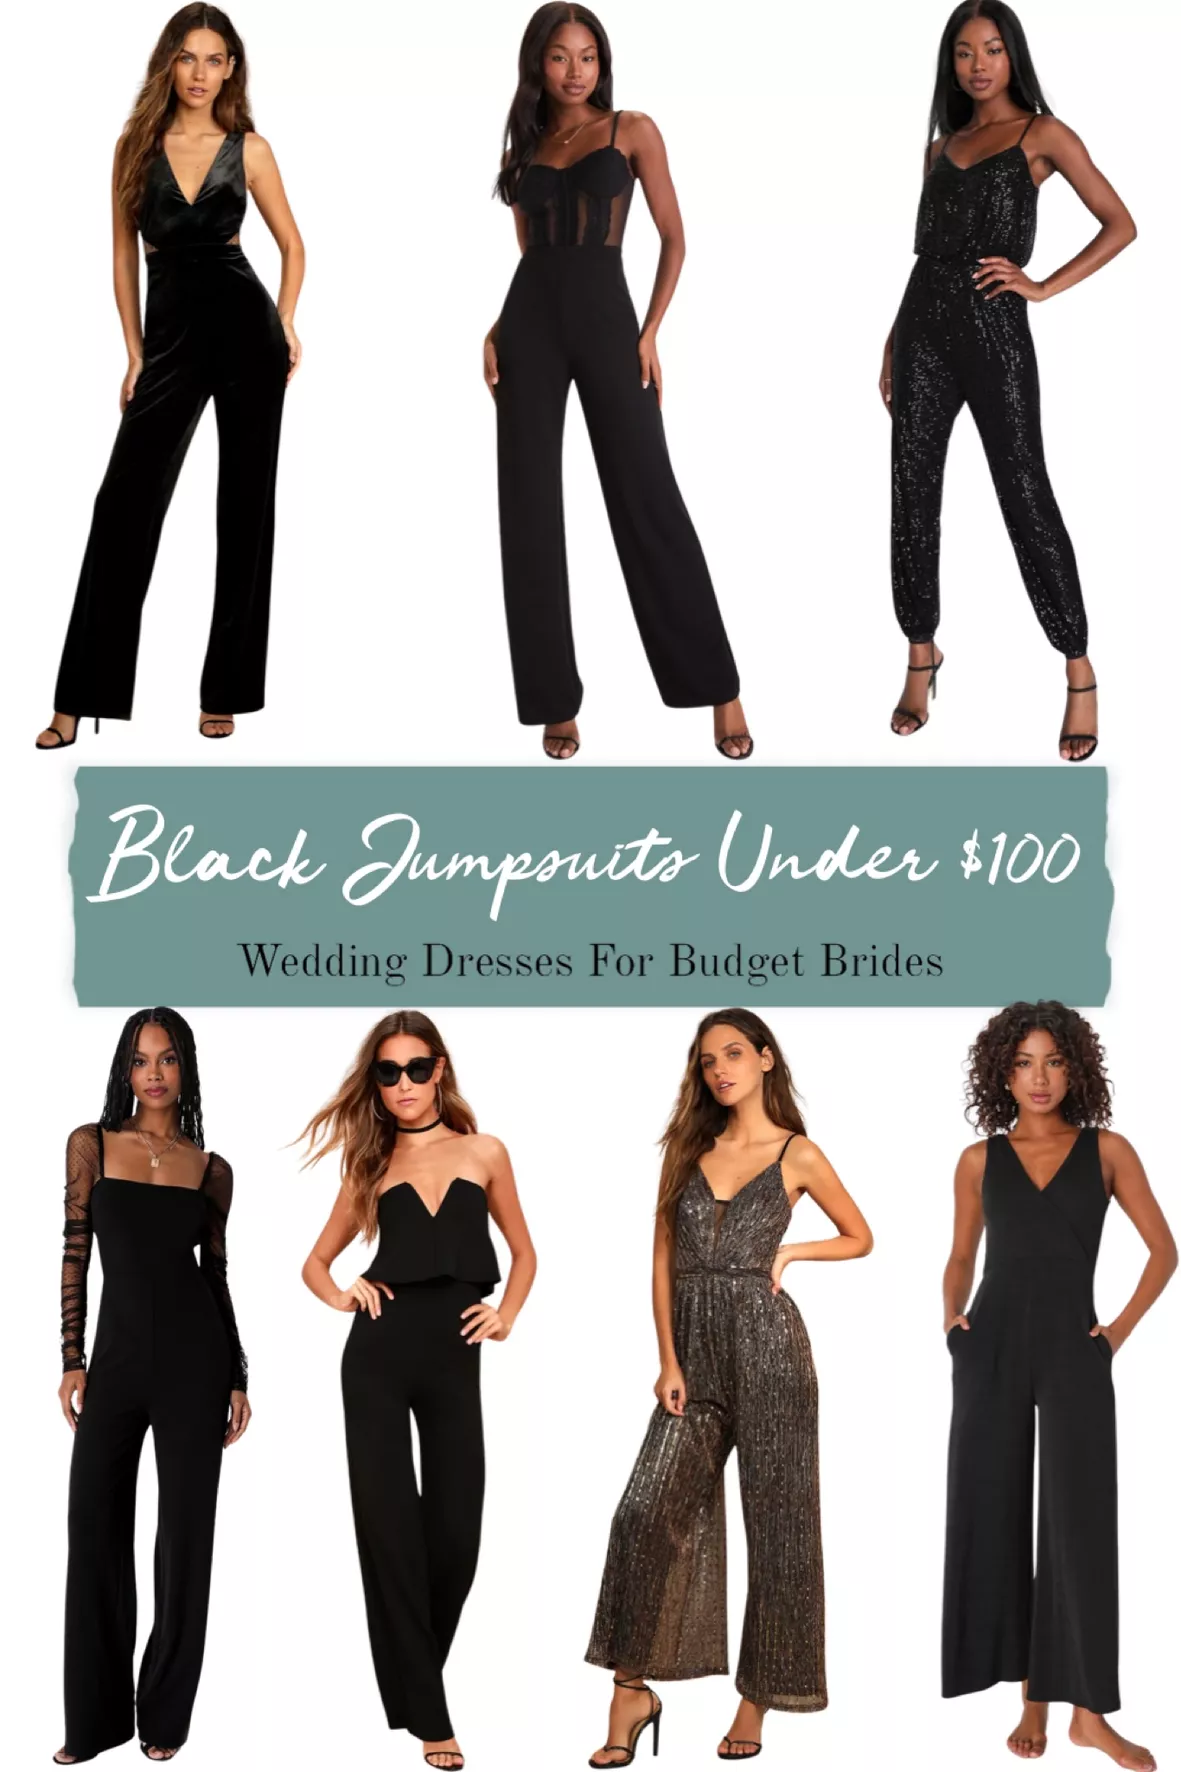 Velvet Dresses, Jumpsuits and Formal Gowns